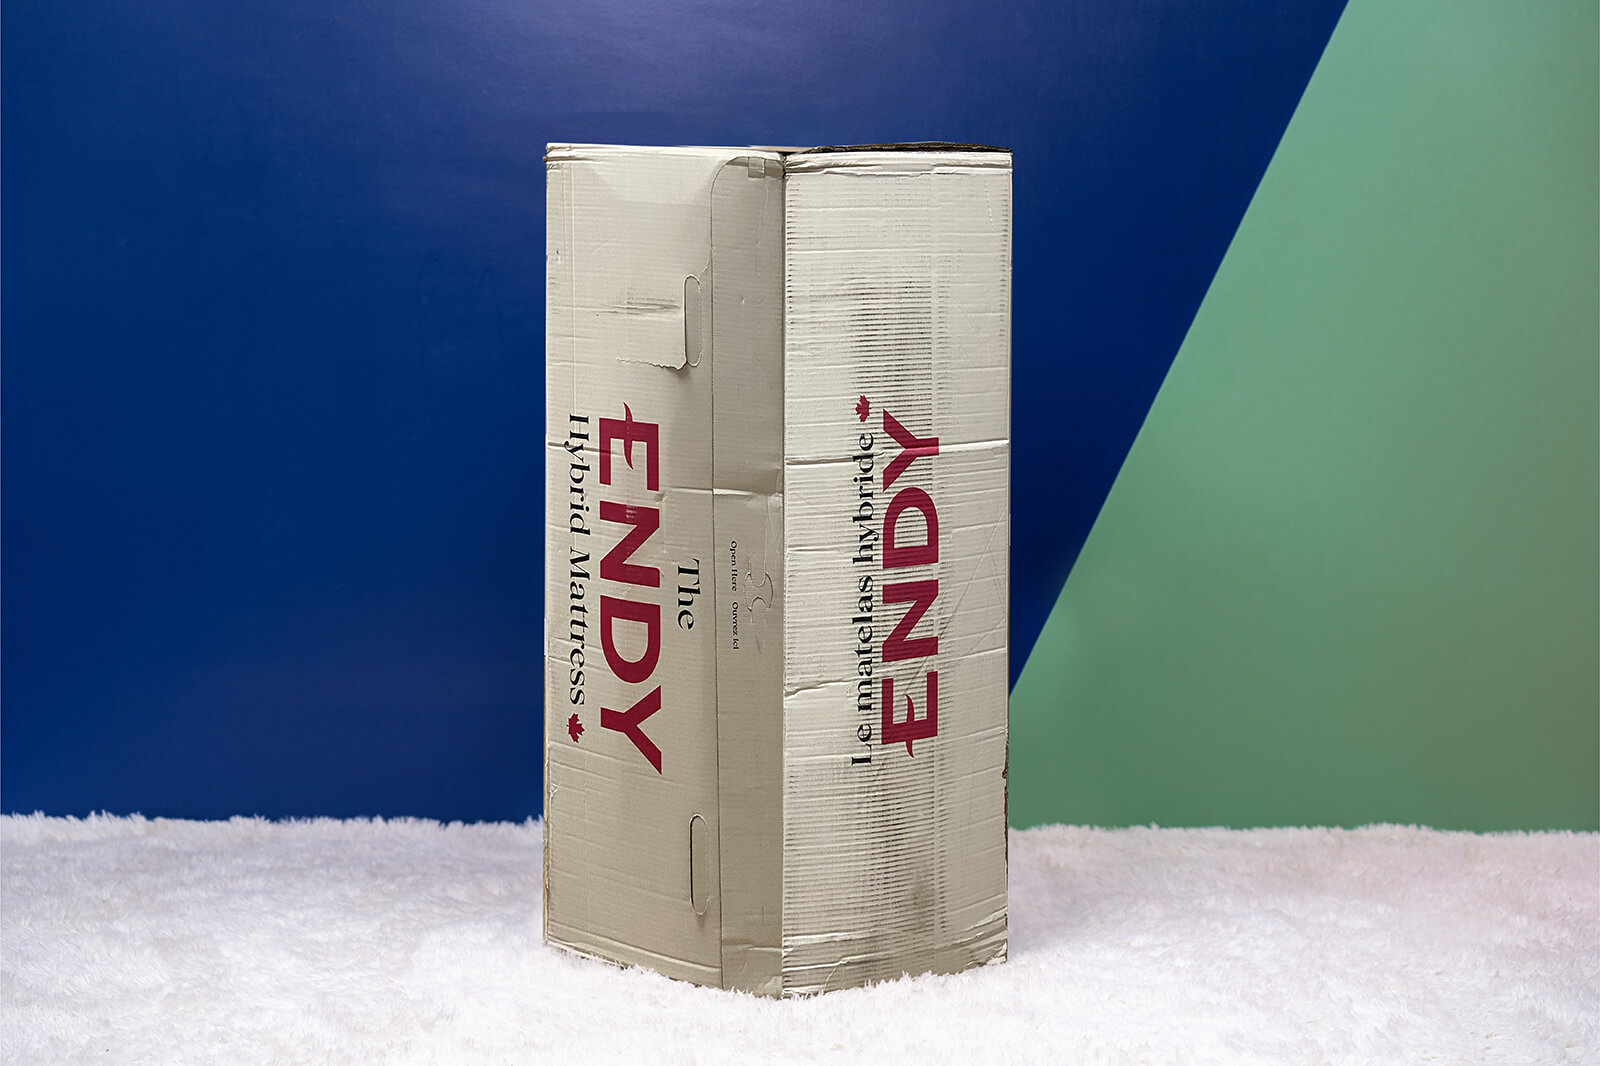 Photo of the Endy Hybrid Mattress box on the floor in a bedroom taken from a front angle.